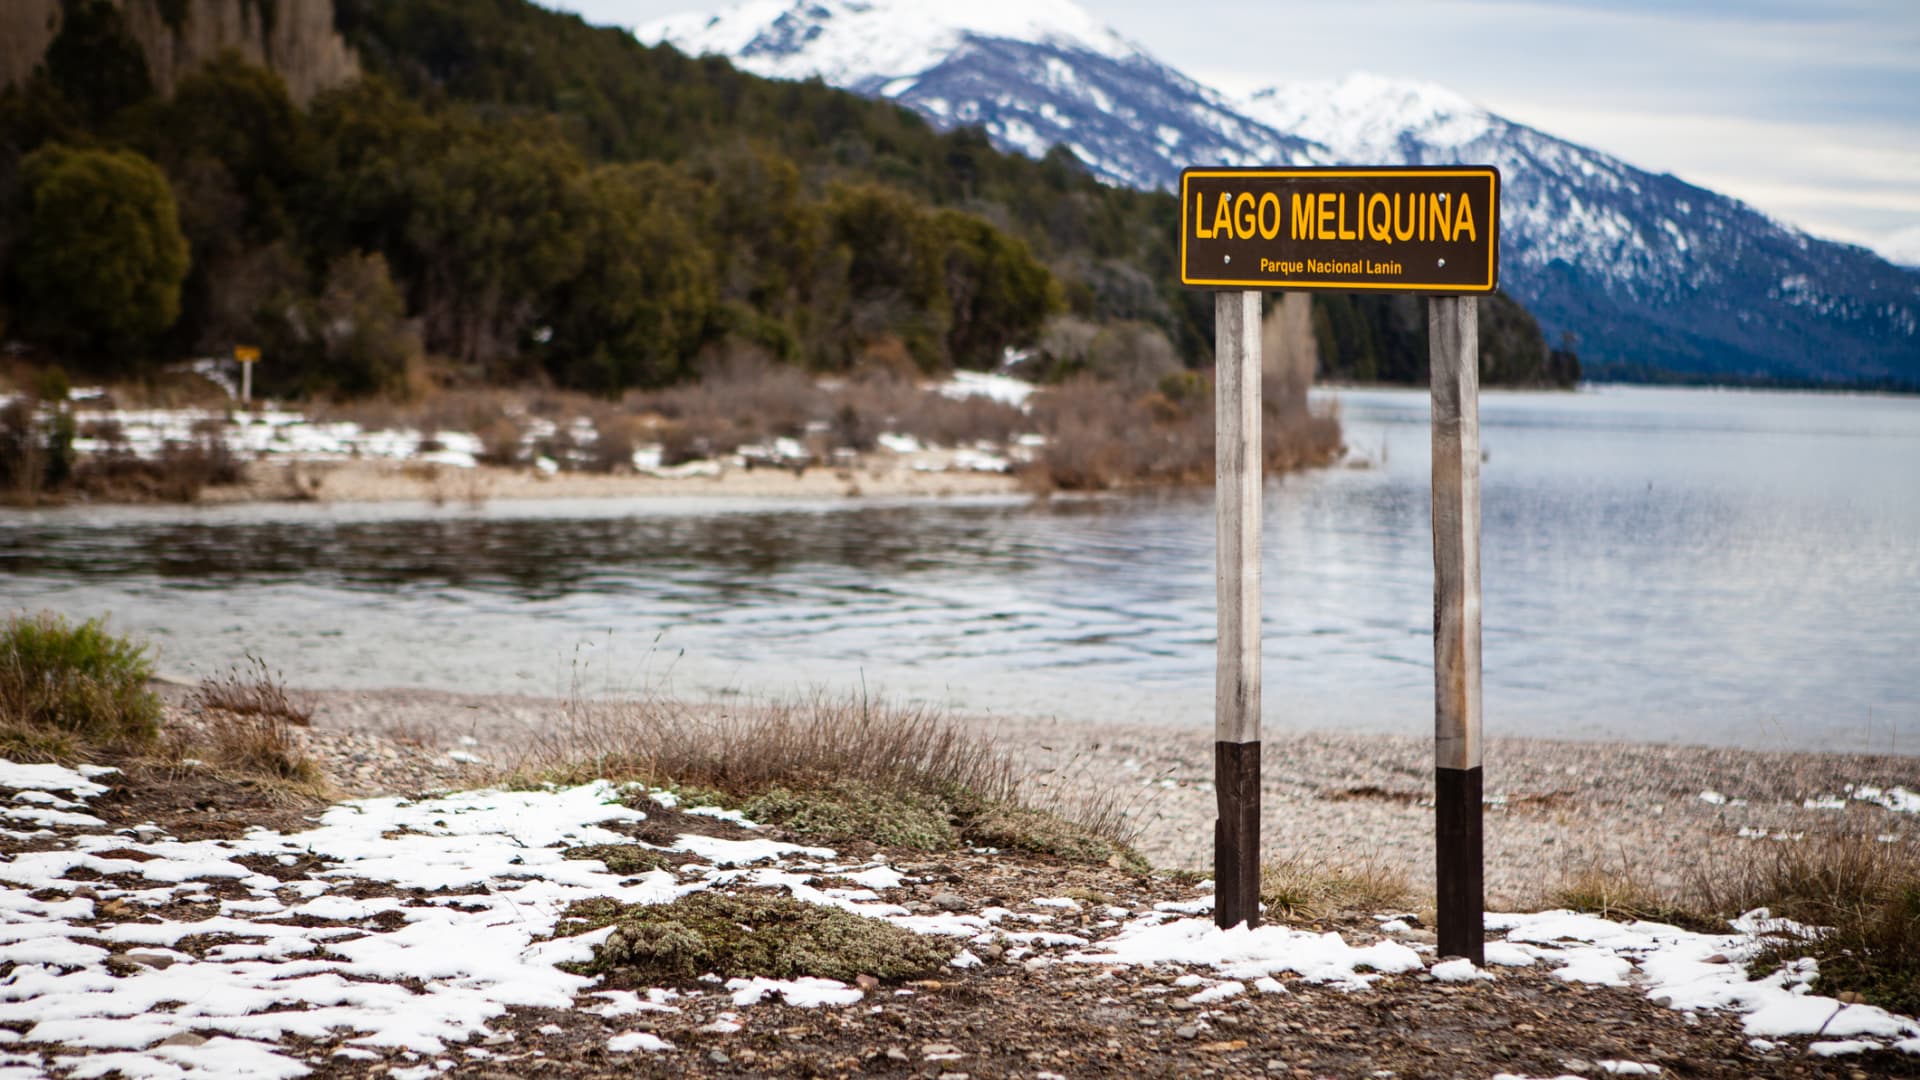 Ruta de los Siete Lagos, also known as Route of the Seven Lakes, in Argentina.